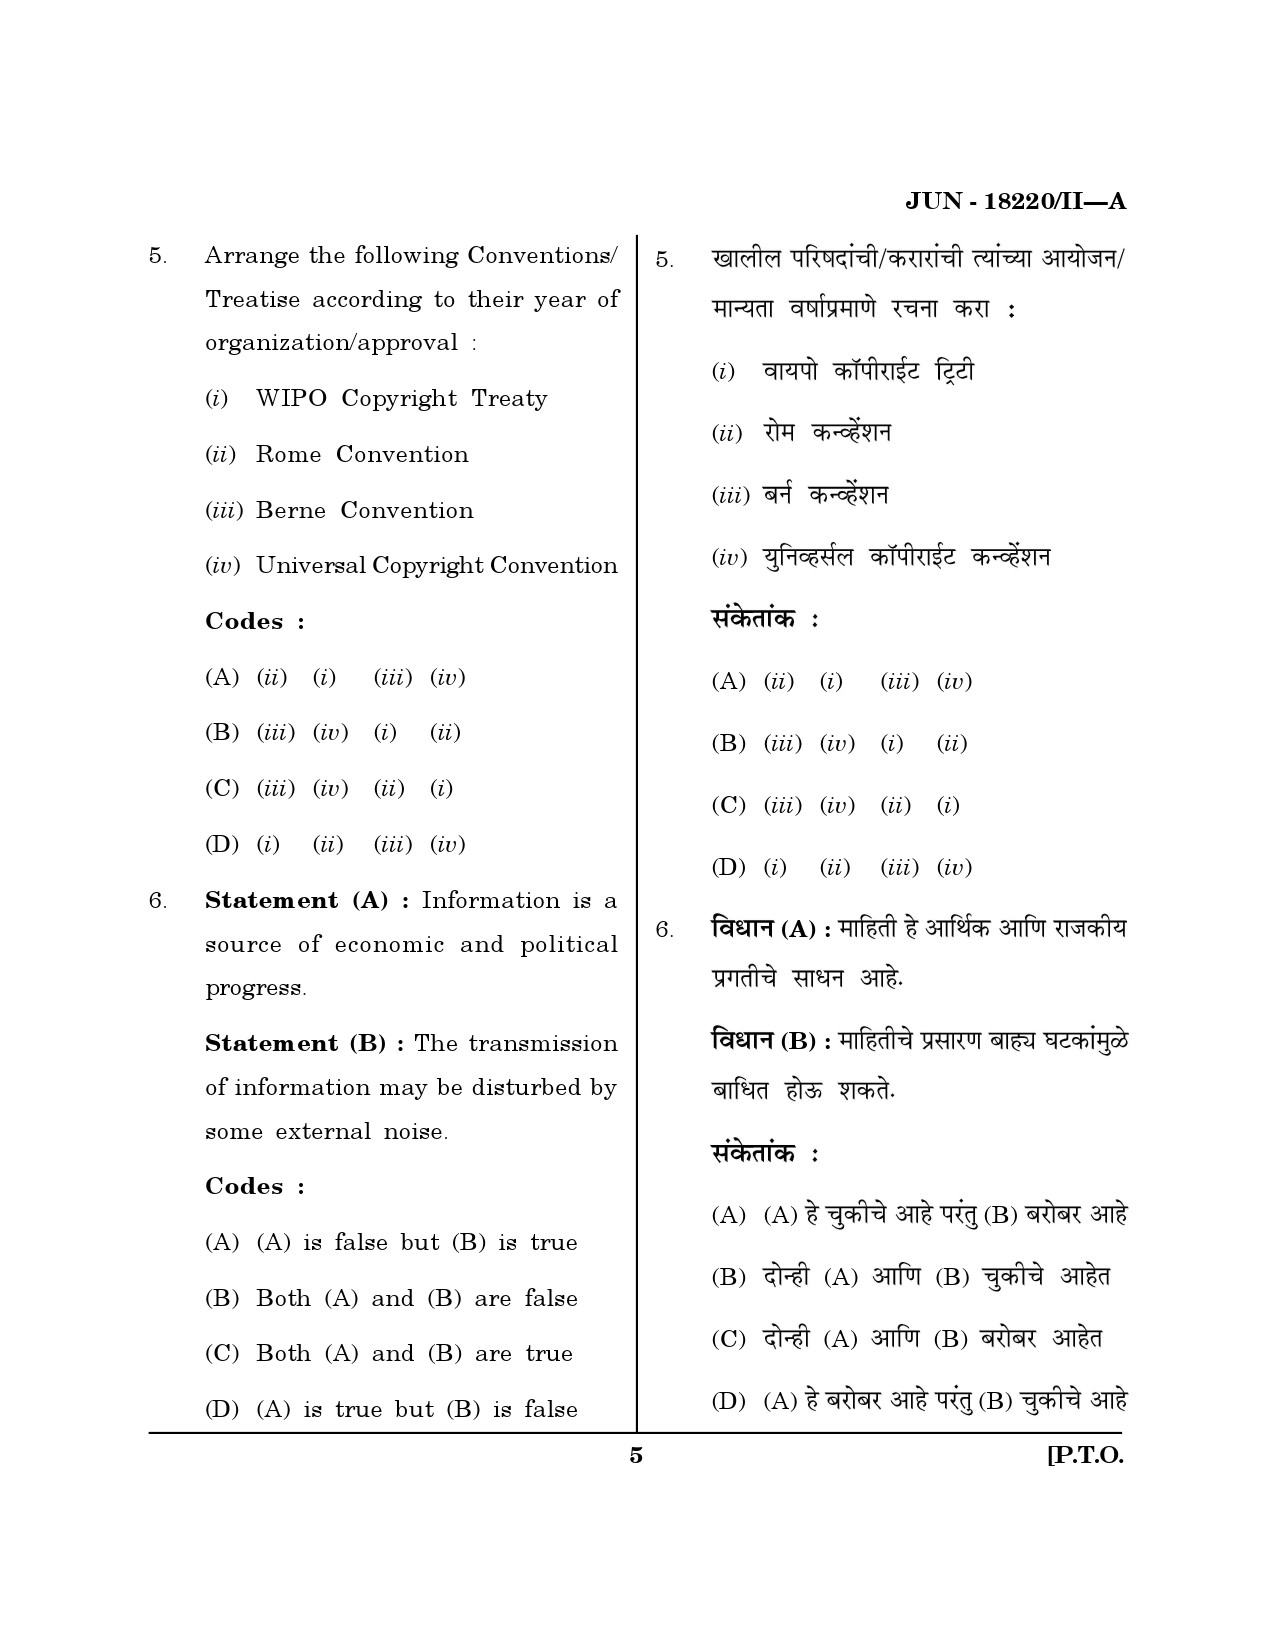 Maharashtra SET Library Information Science Question Paper II June 2020 4